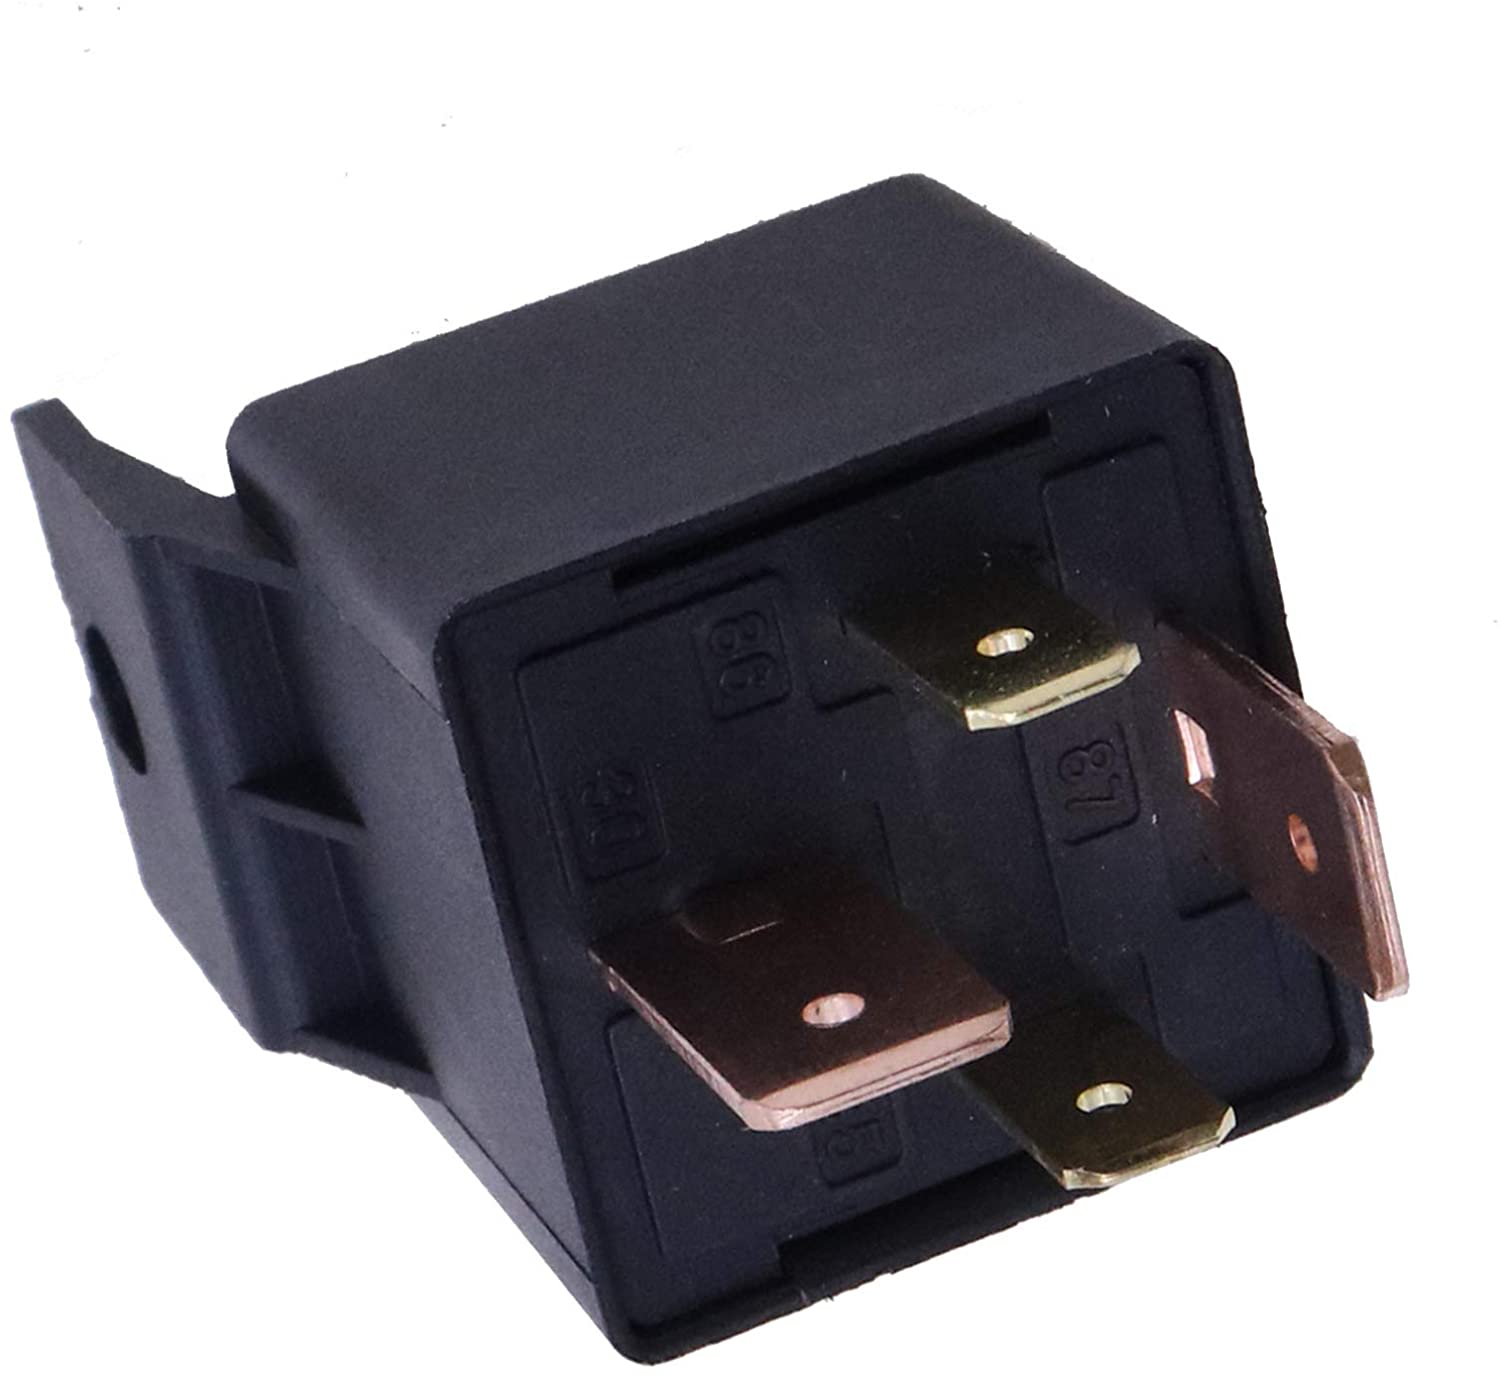 12V 70A Relay 87522476 for New.Holland Tractors BOOMER 3040 BOOMER 3045 BOOMER 3050 BOOMER 45D BOOMER 46D BOOMER 50D BOOMER 54D BOOMER 8N - KUDUPARTS